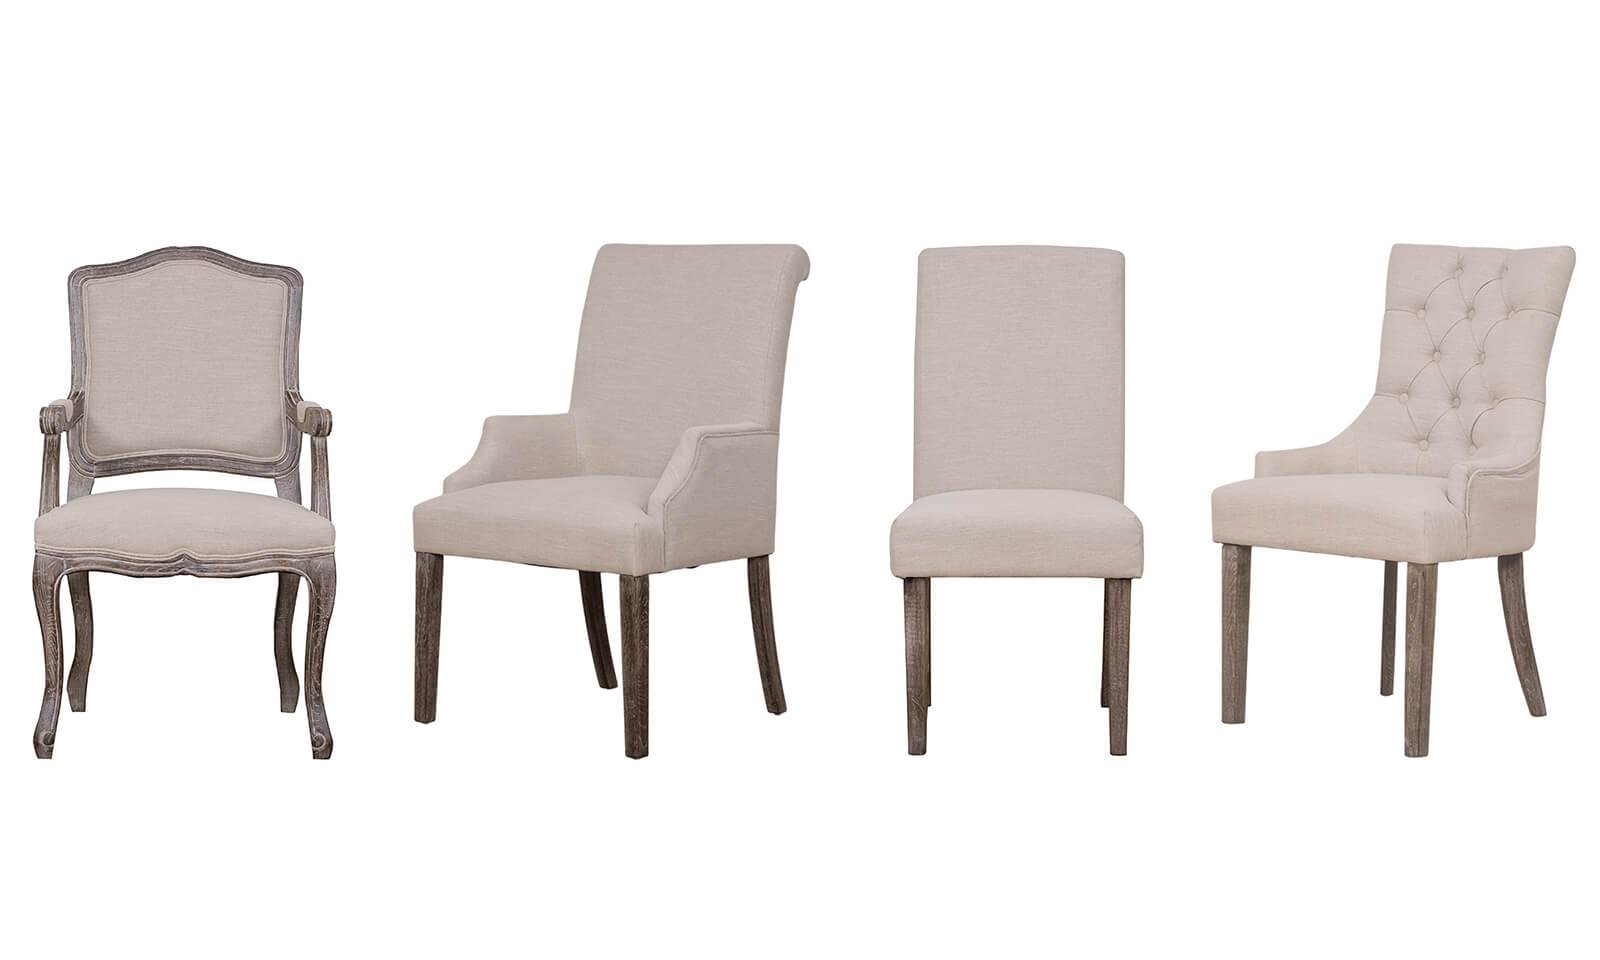 LEATHER GALLERY GUIDE TO CHOOSING A DINING ROOM CHAIR